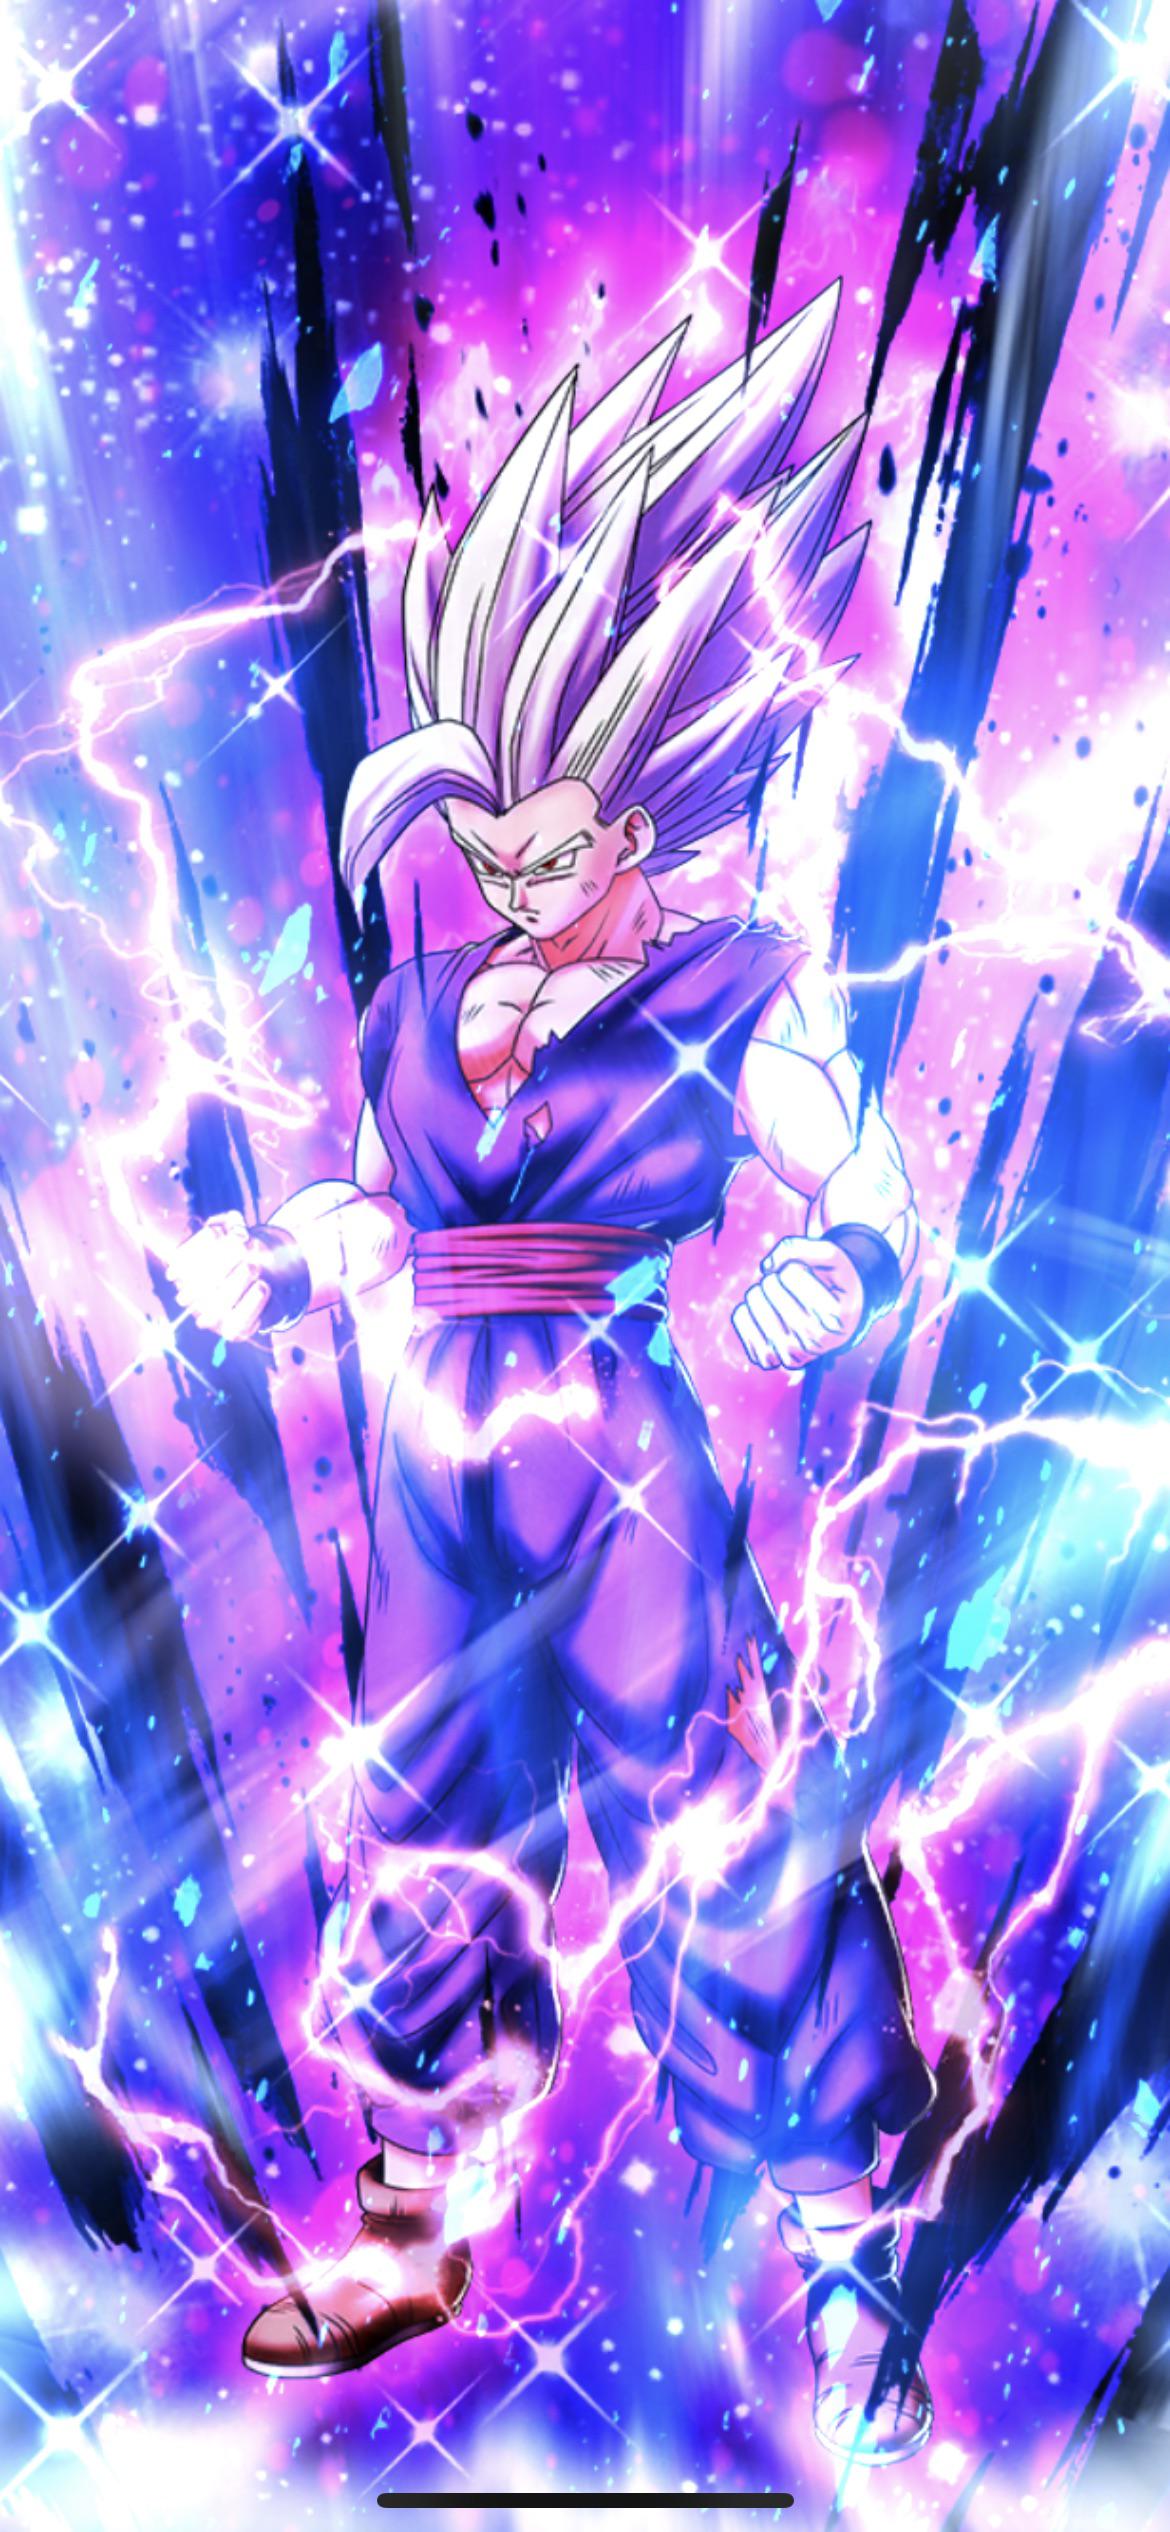 Controversial thought: Gohan (BEAST) is the Legendary Super Saiyan